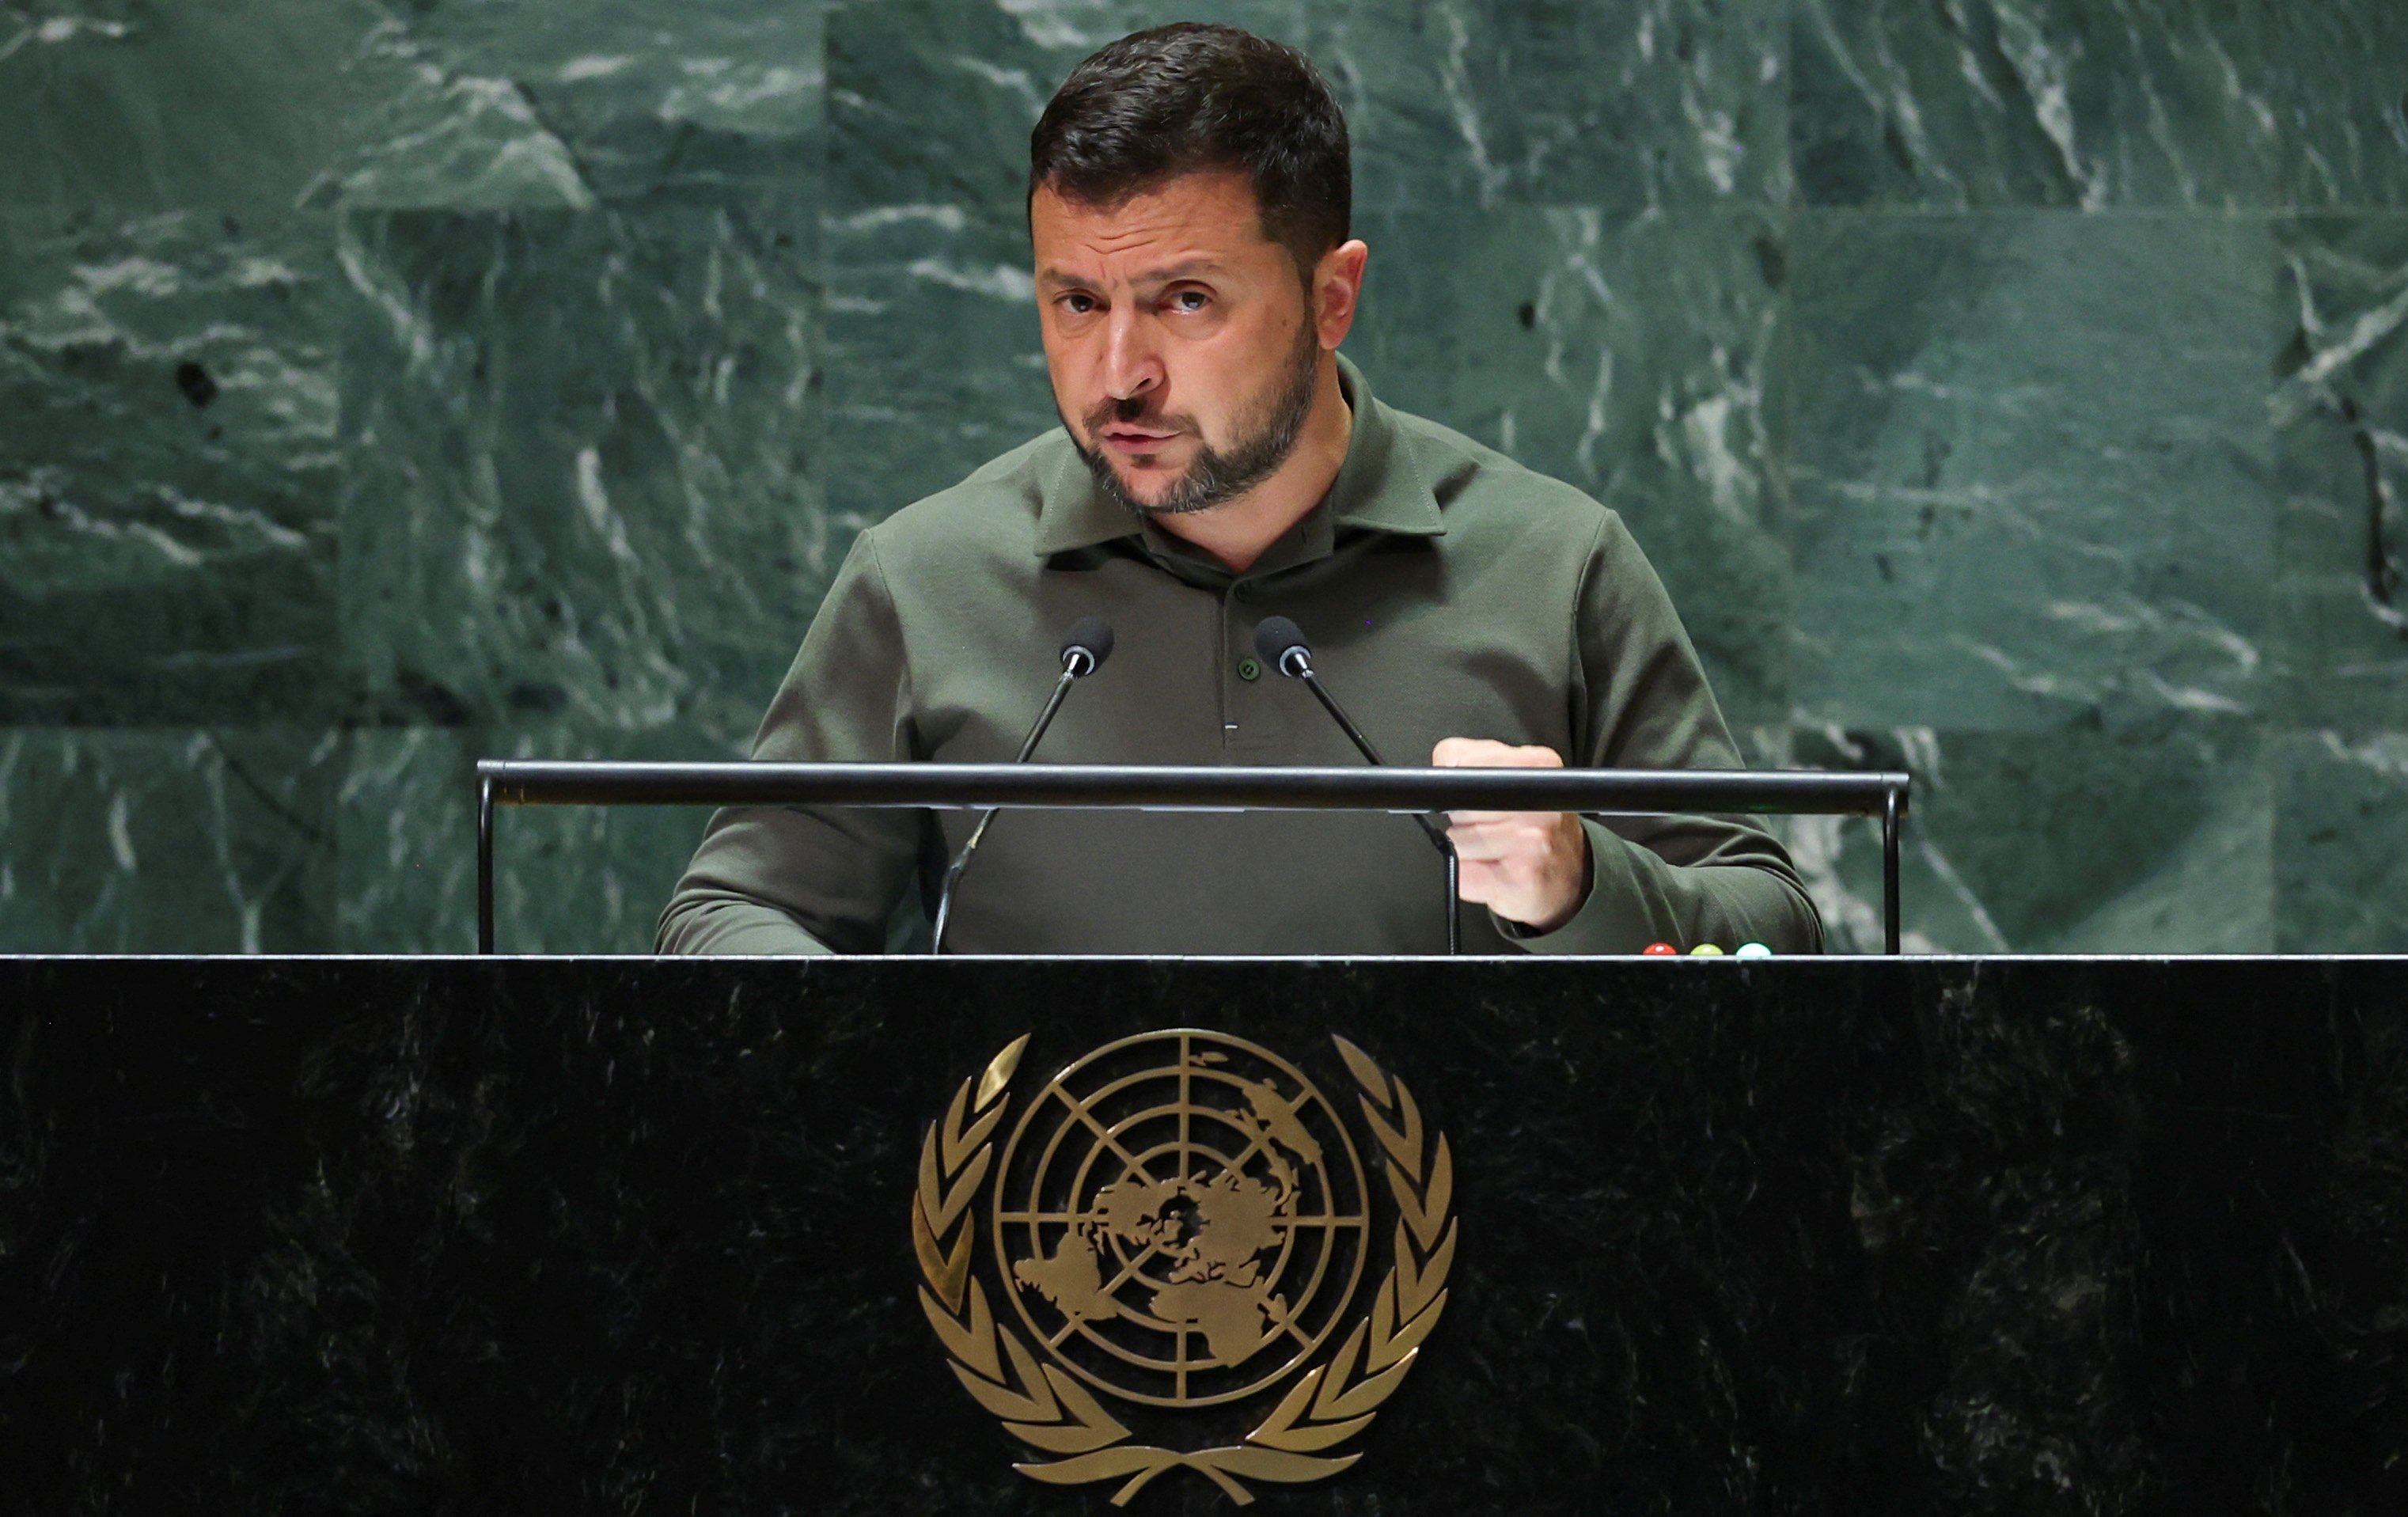 Ukraine’s President Volodymyr Zelensky tried to shore up support during his UN address. Photo: Reuters